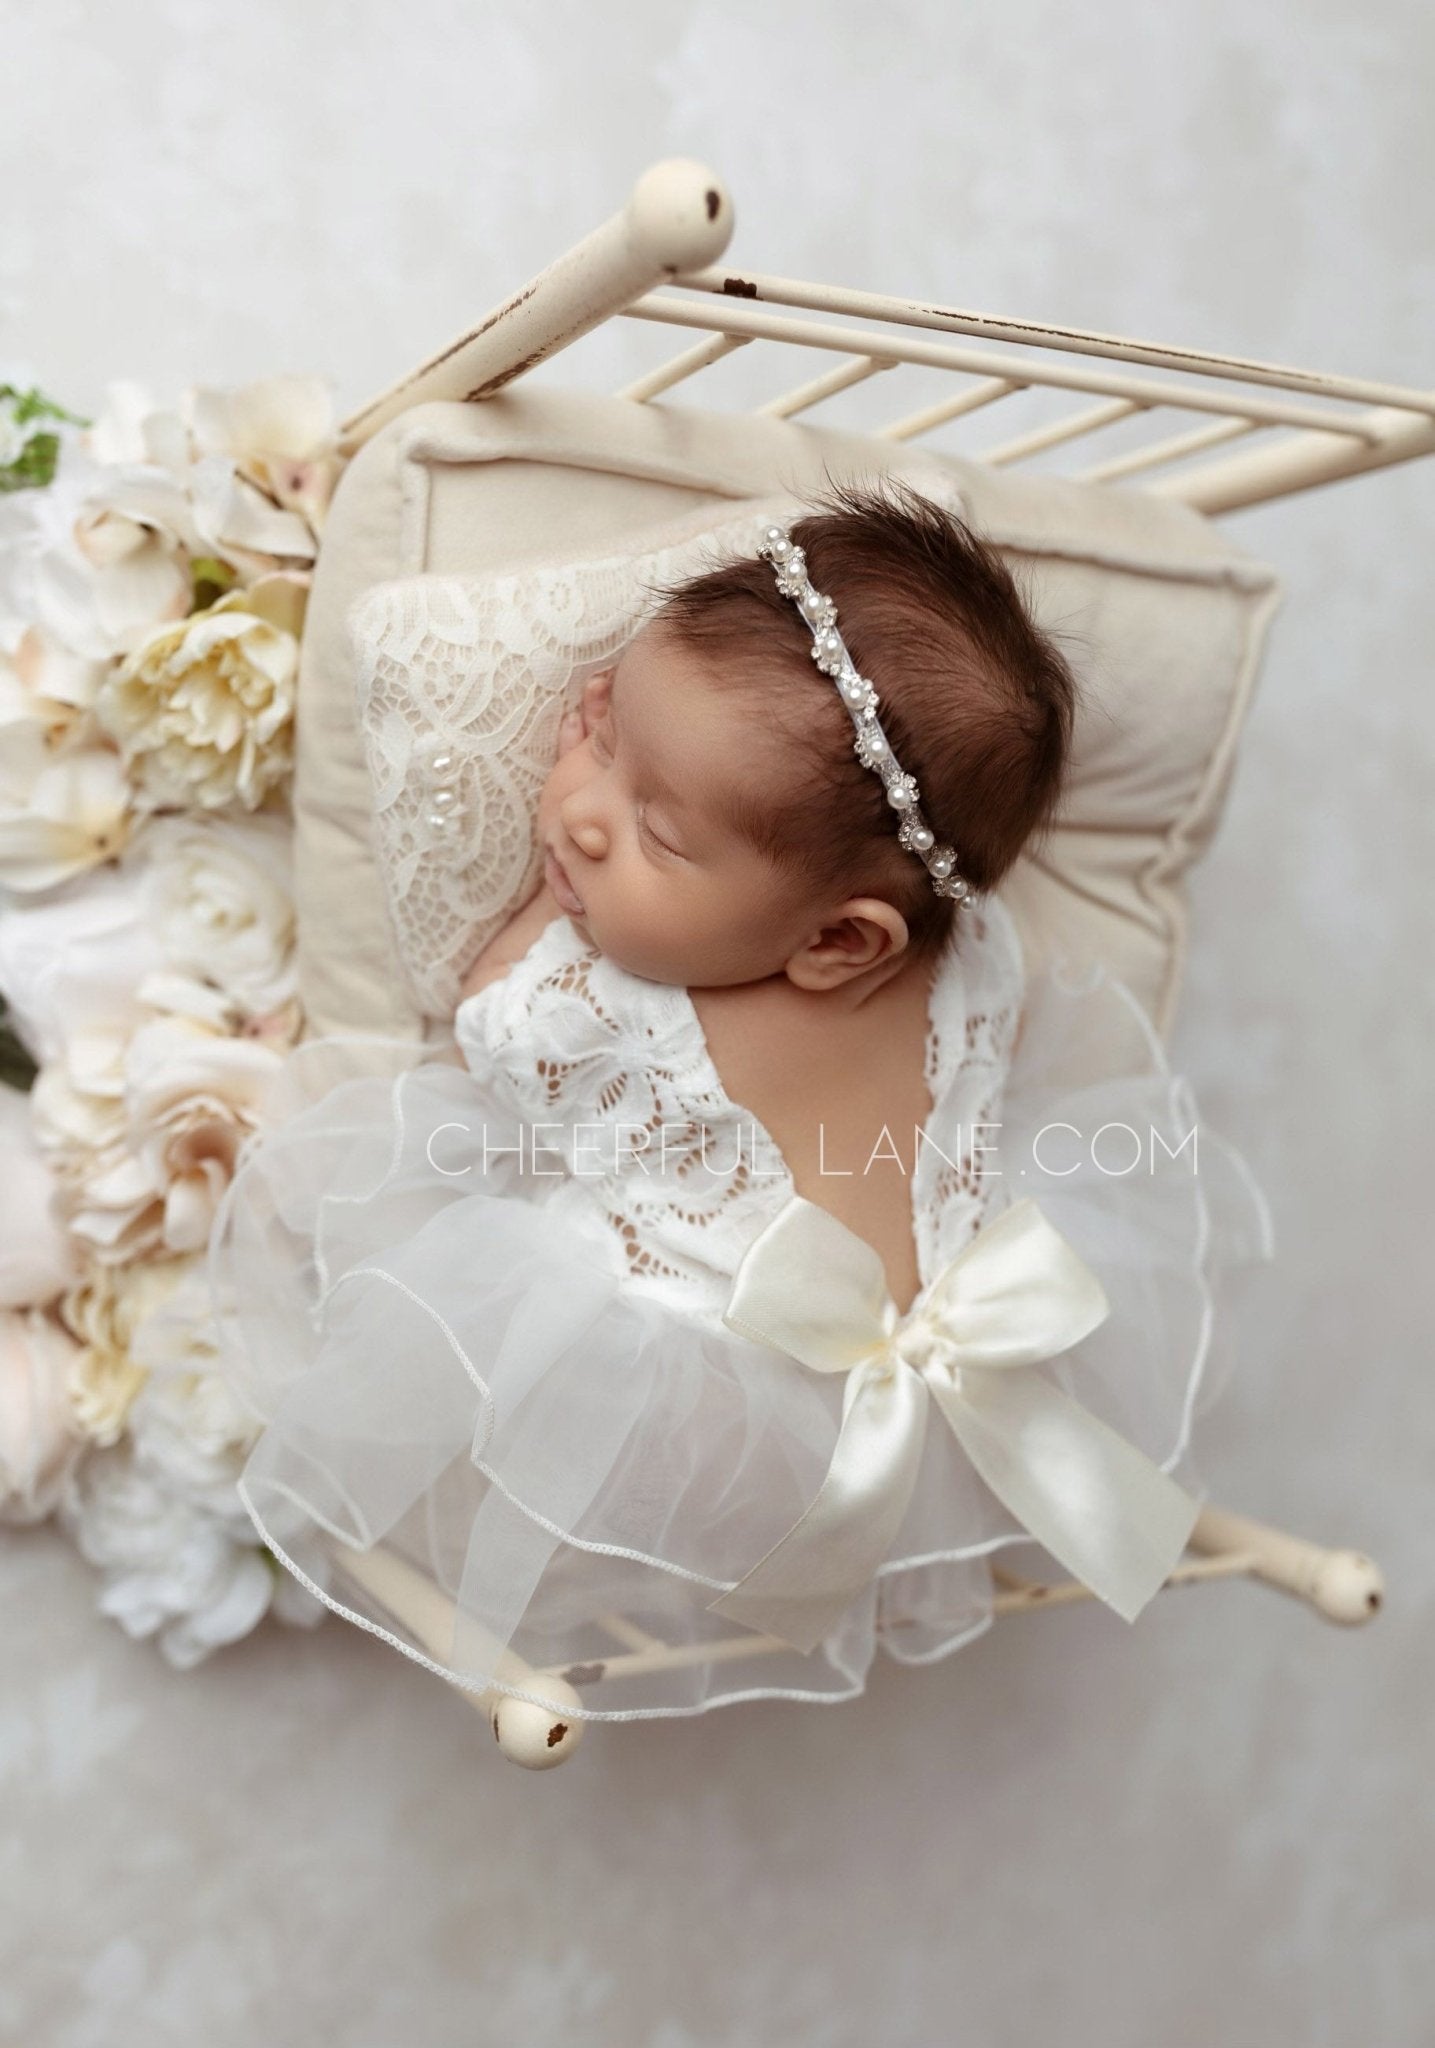 Load image into Gallery viewer, Newborn Photo Prop Lace Romper with open back and ruffle skirt - Cheerful Lane
